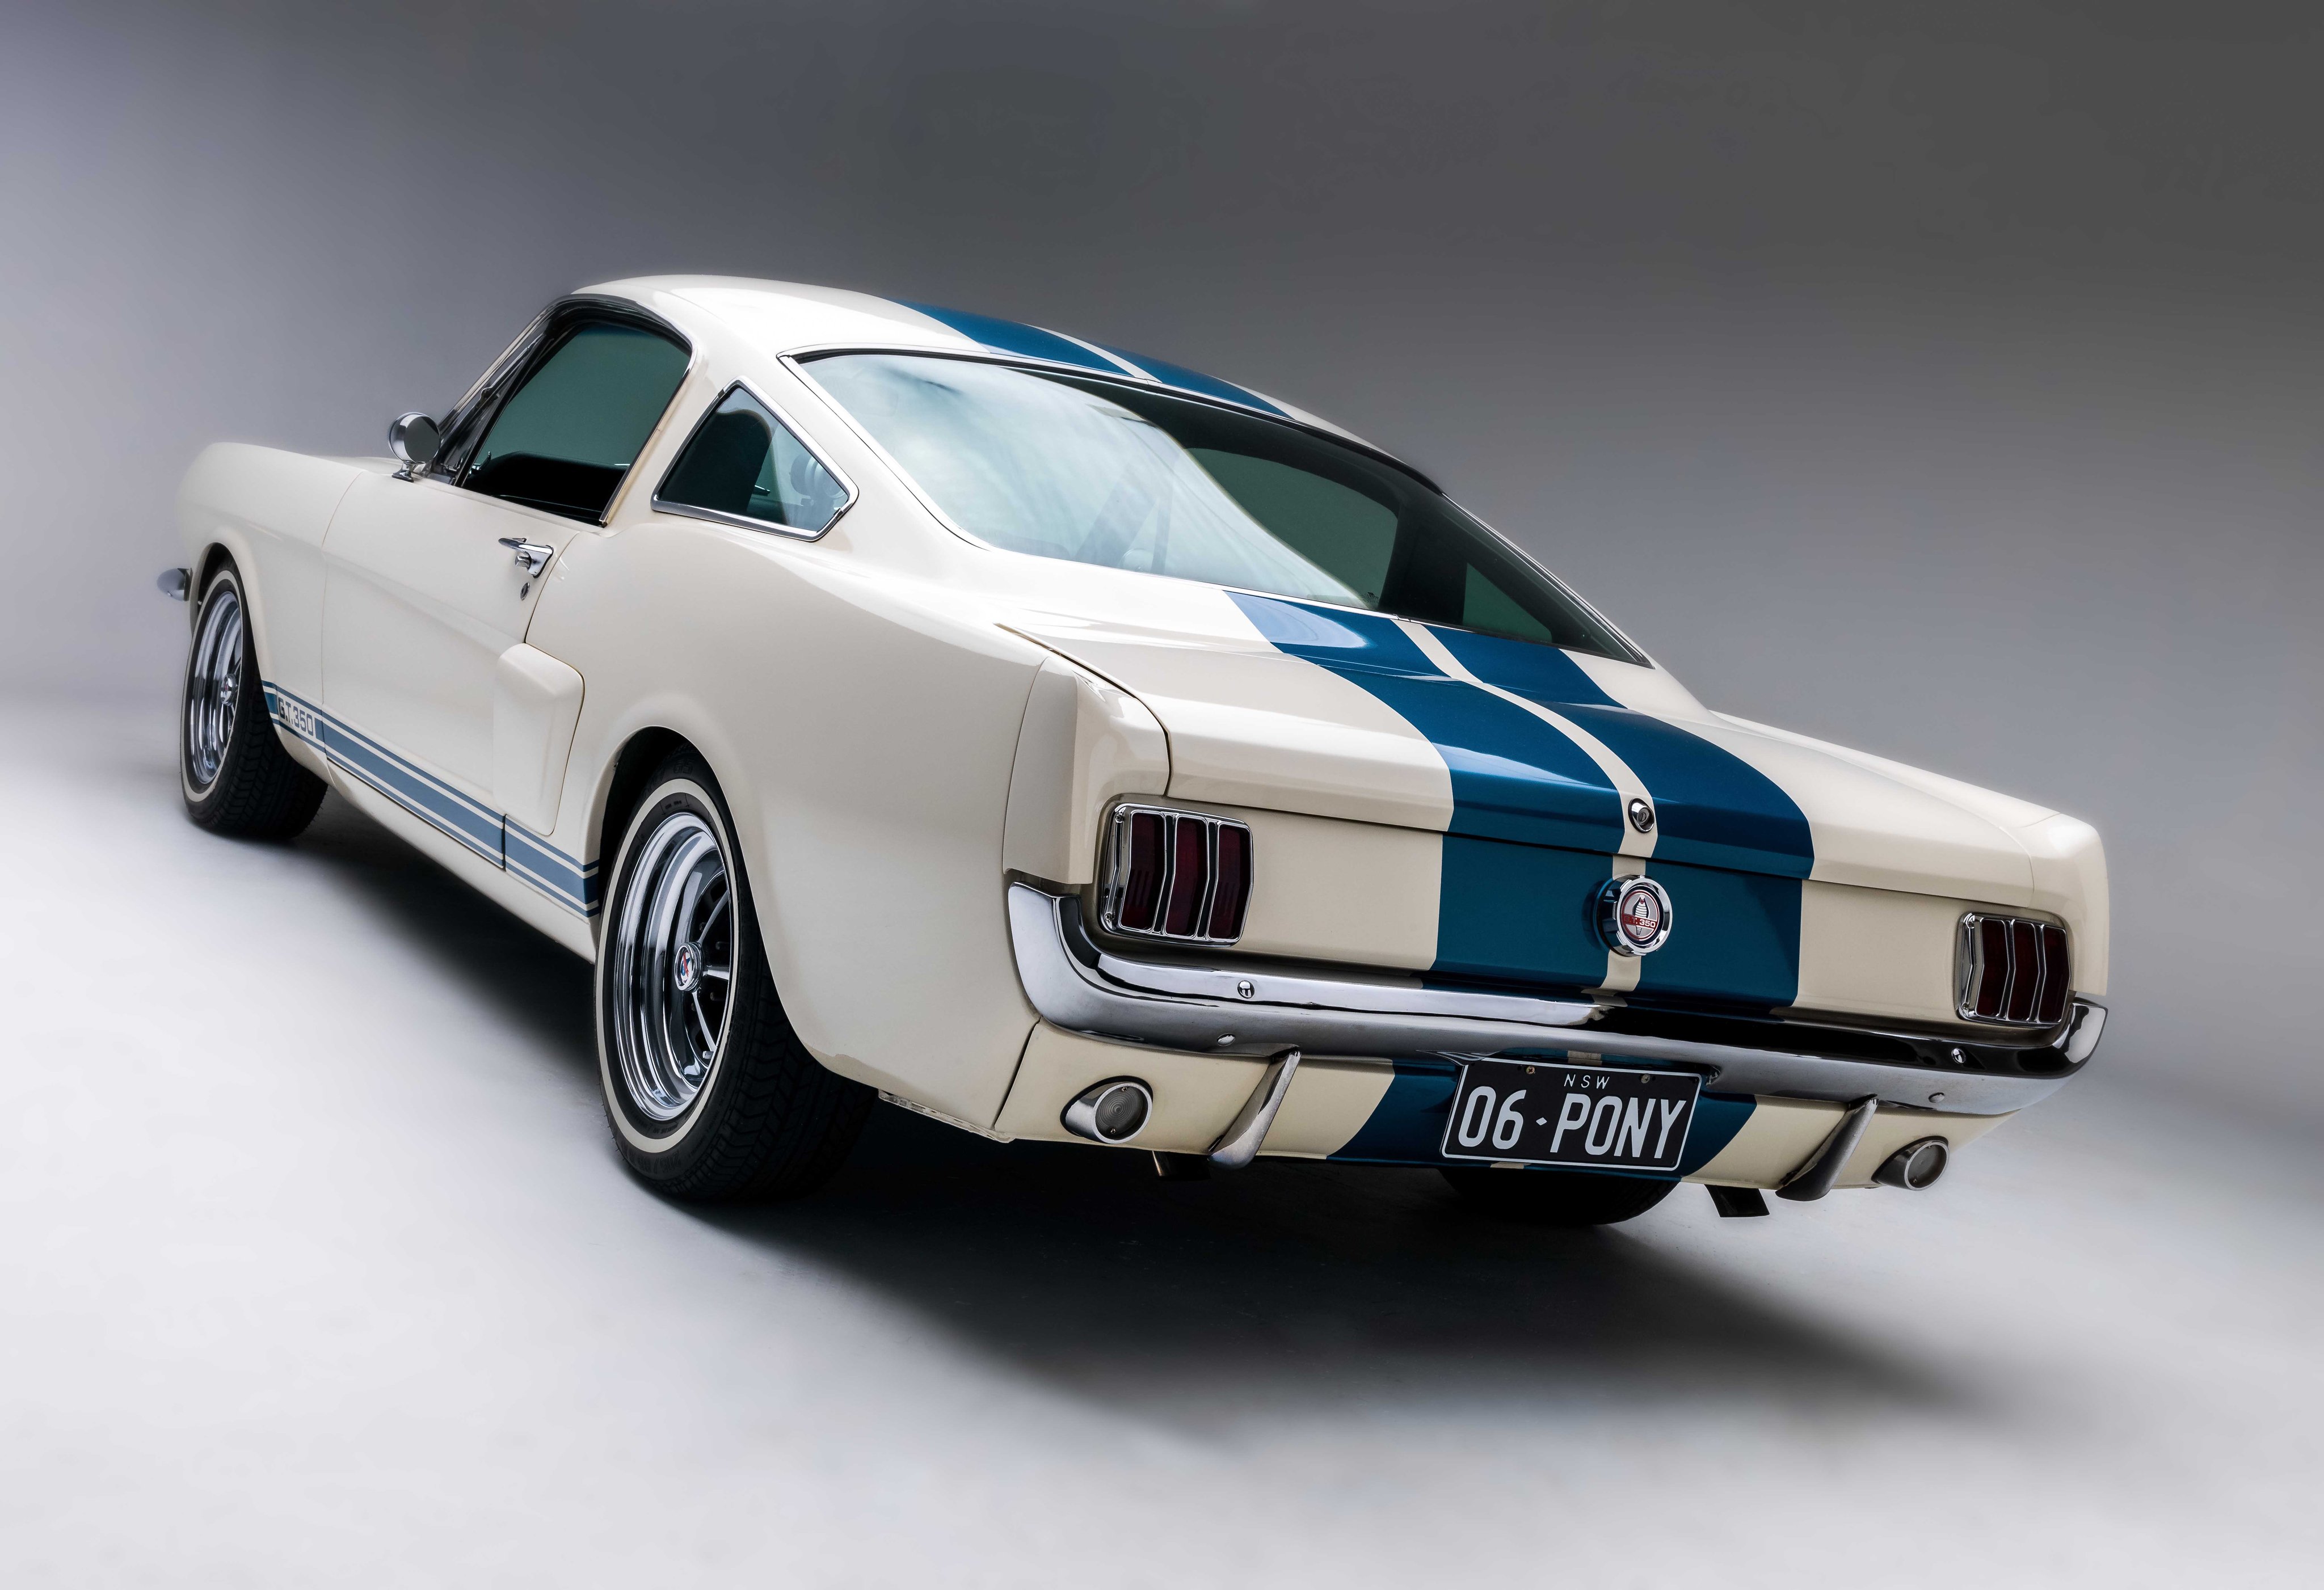 Ford Shelby Gt350 Fastback Muscle Car White Car 4096x2803